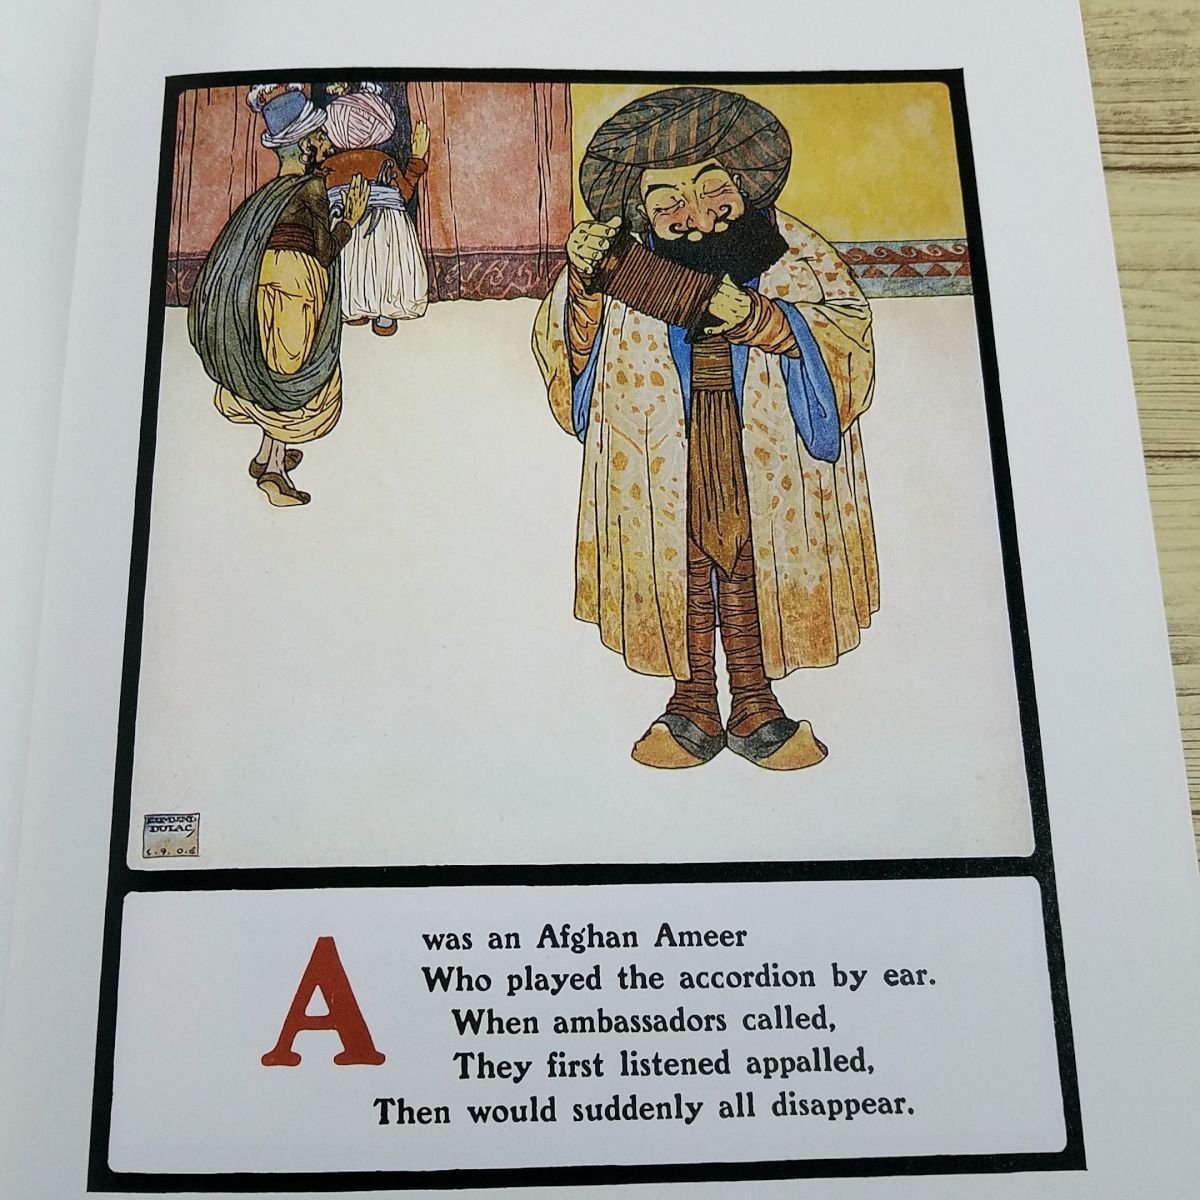  foreign language picture book [ Edmund *te. rack Lyrics Pathetic & Humorous from A to Z] alphabet study English picture book book of paintings in print [ postage 180 jpy ]